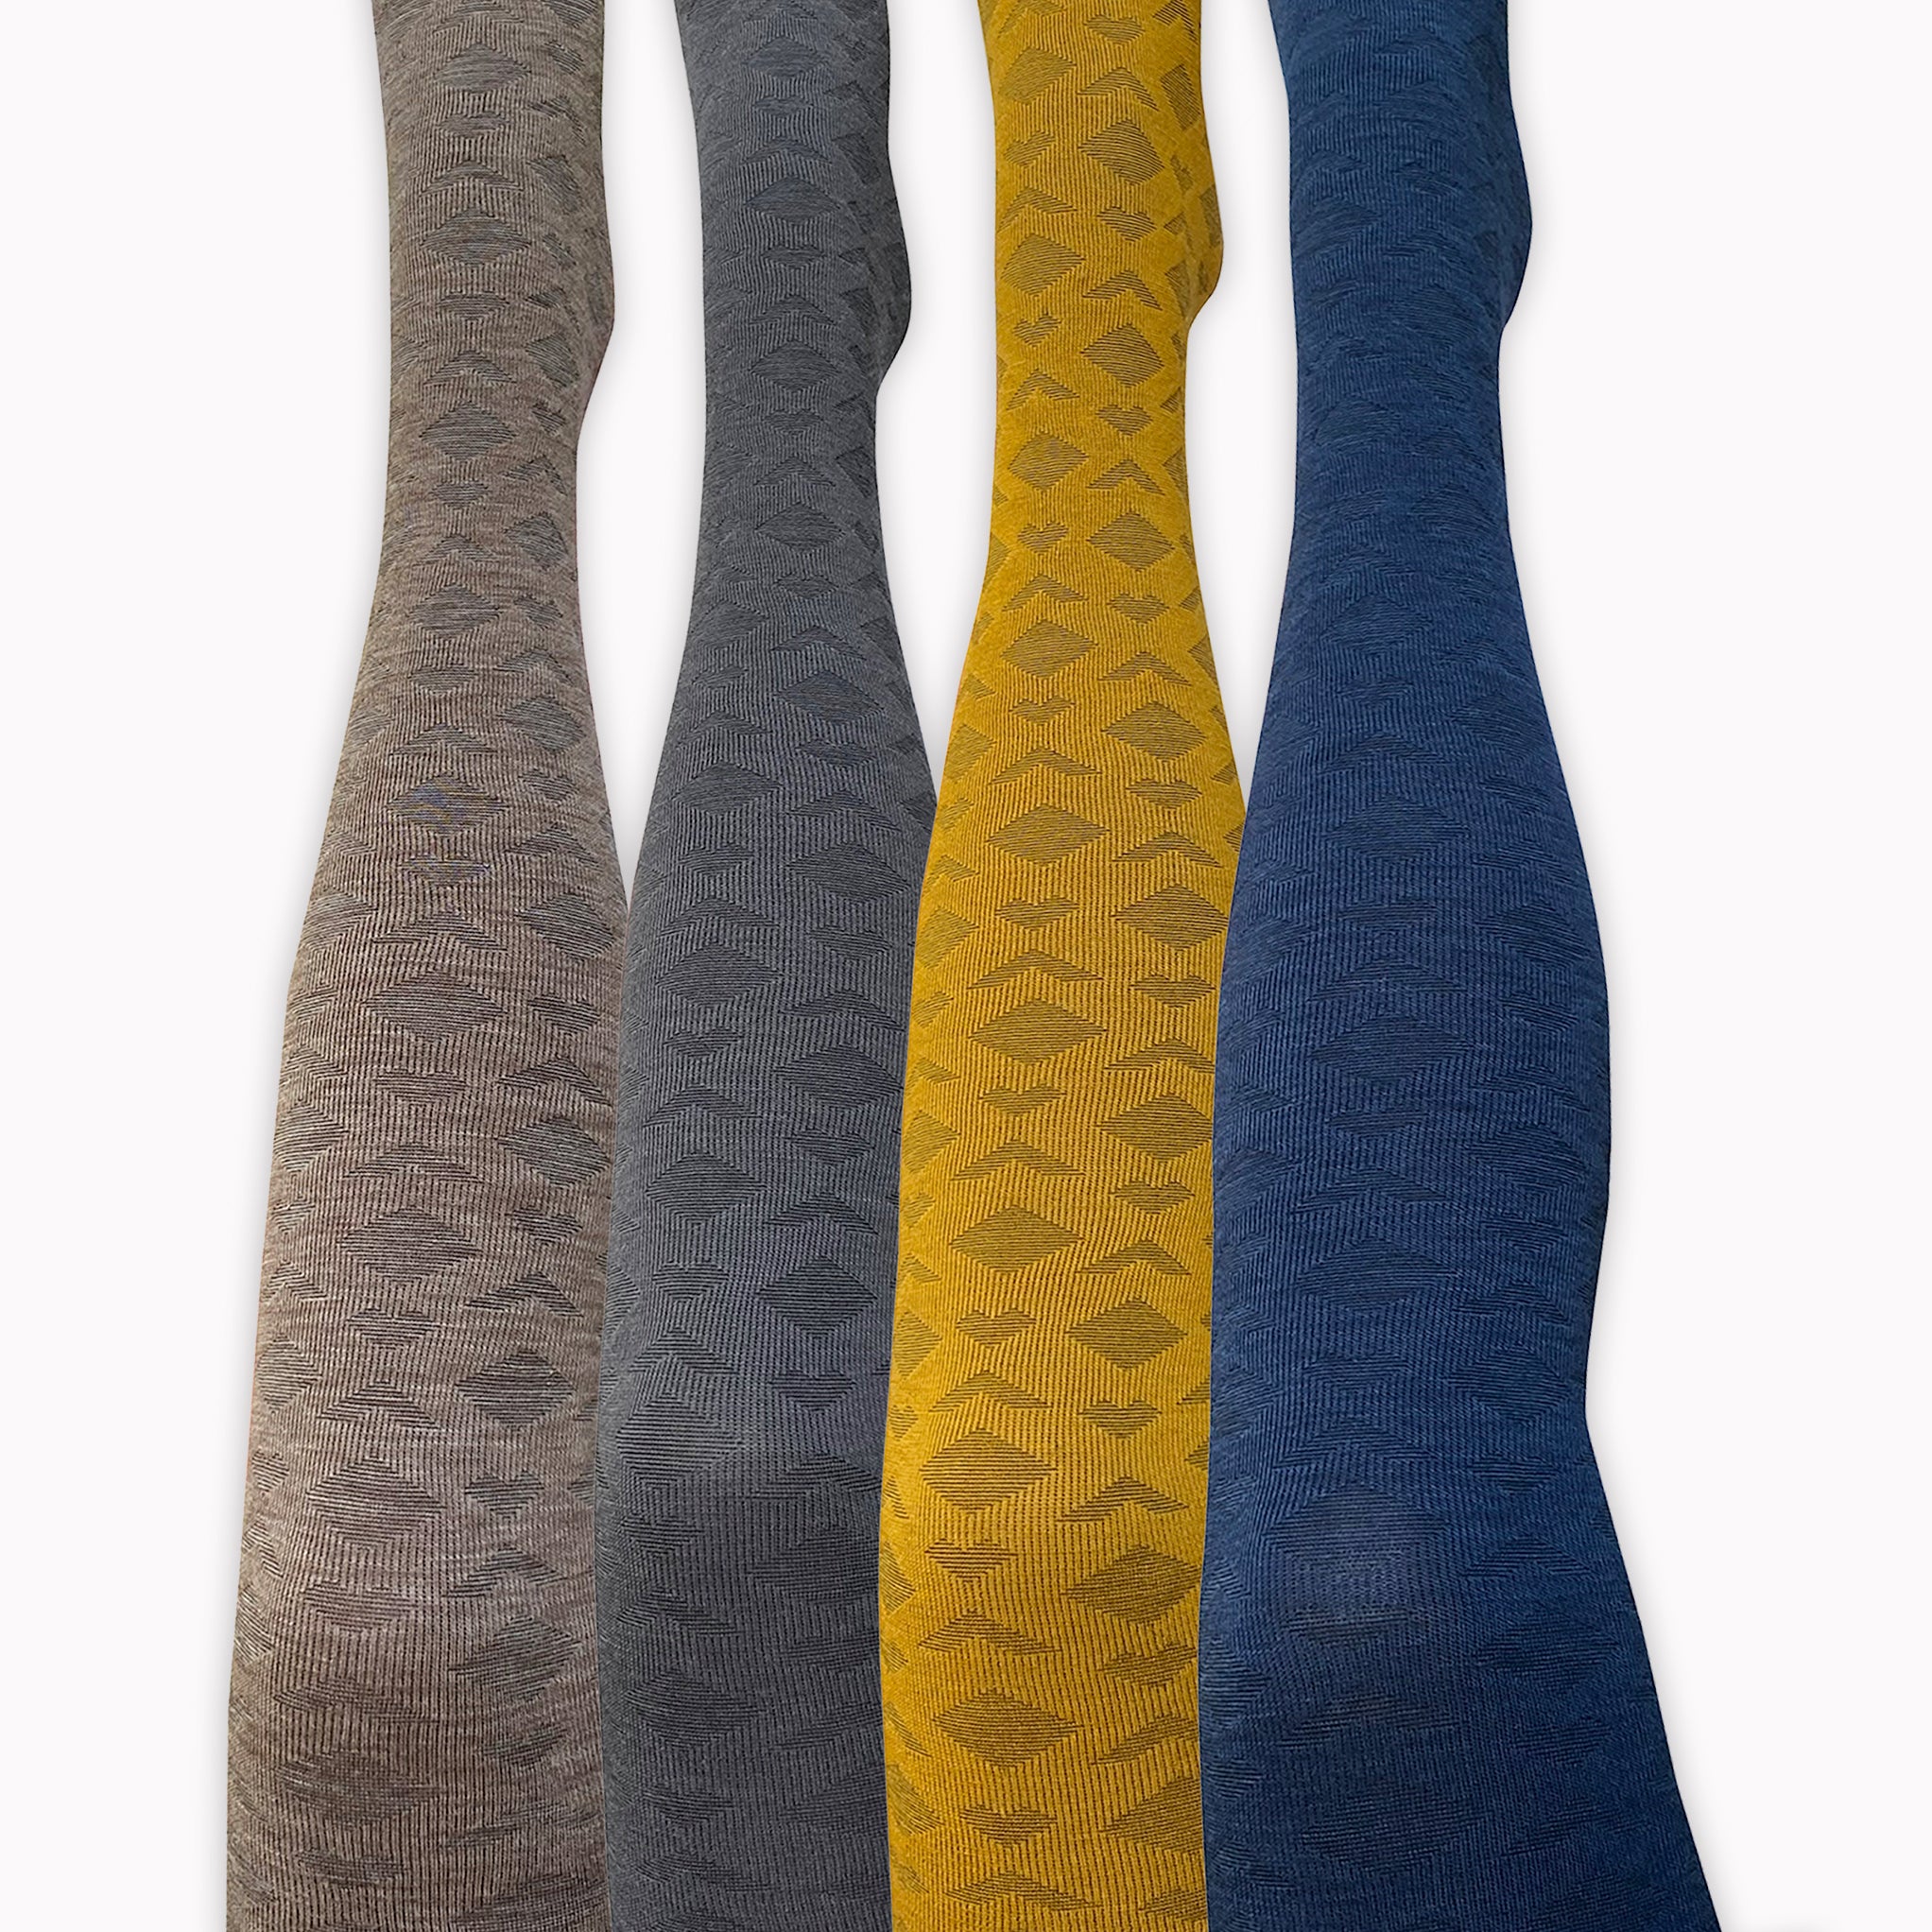 Tightology Merino Wool Deco Tights in Brown, Grey, Mustard and Navy